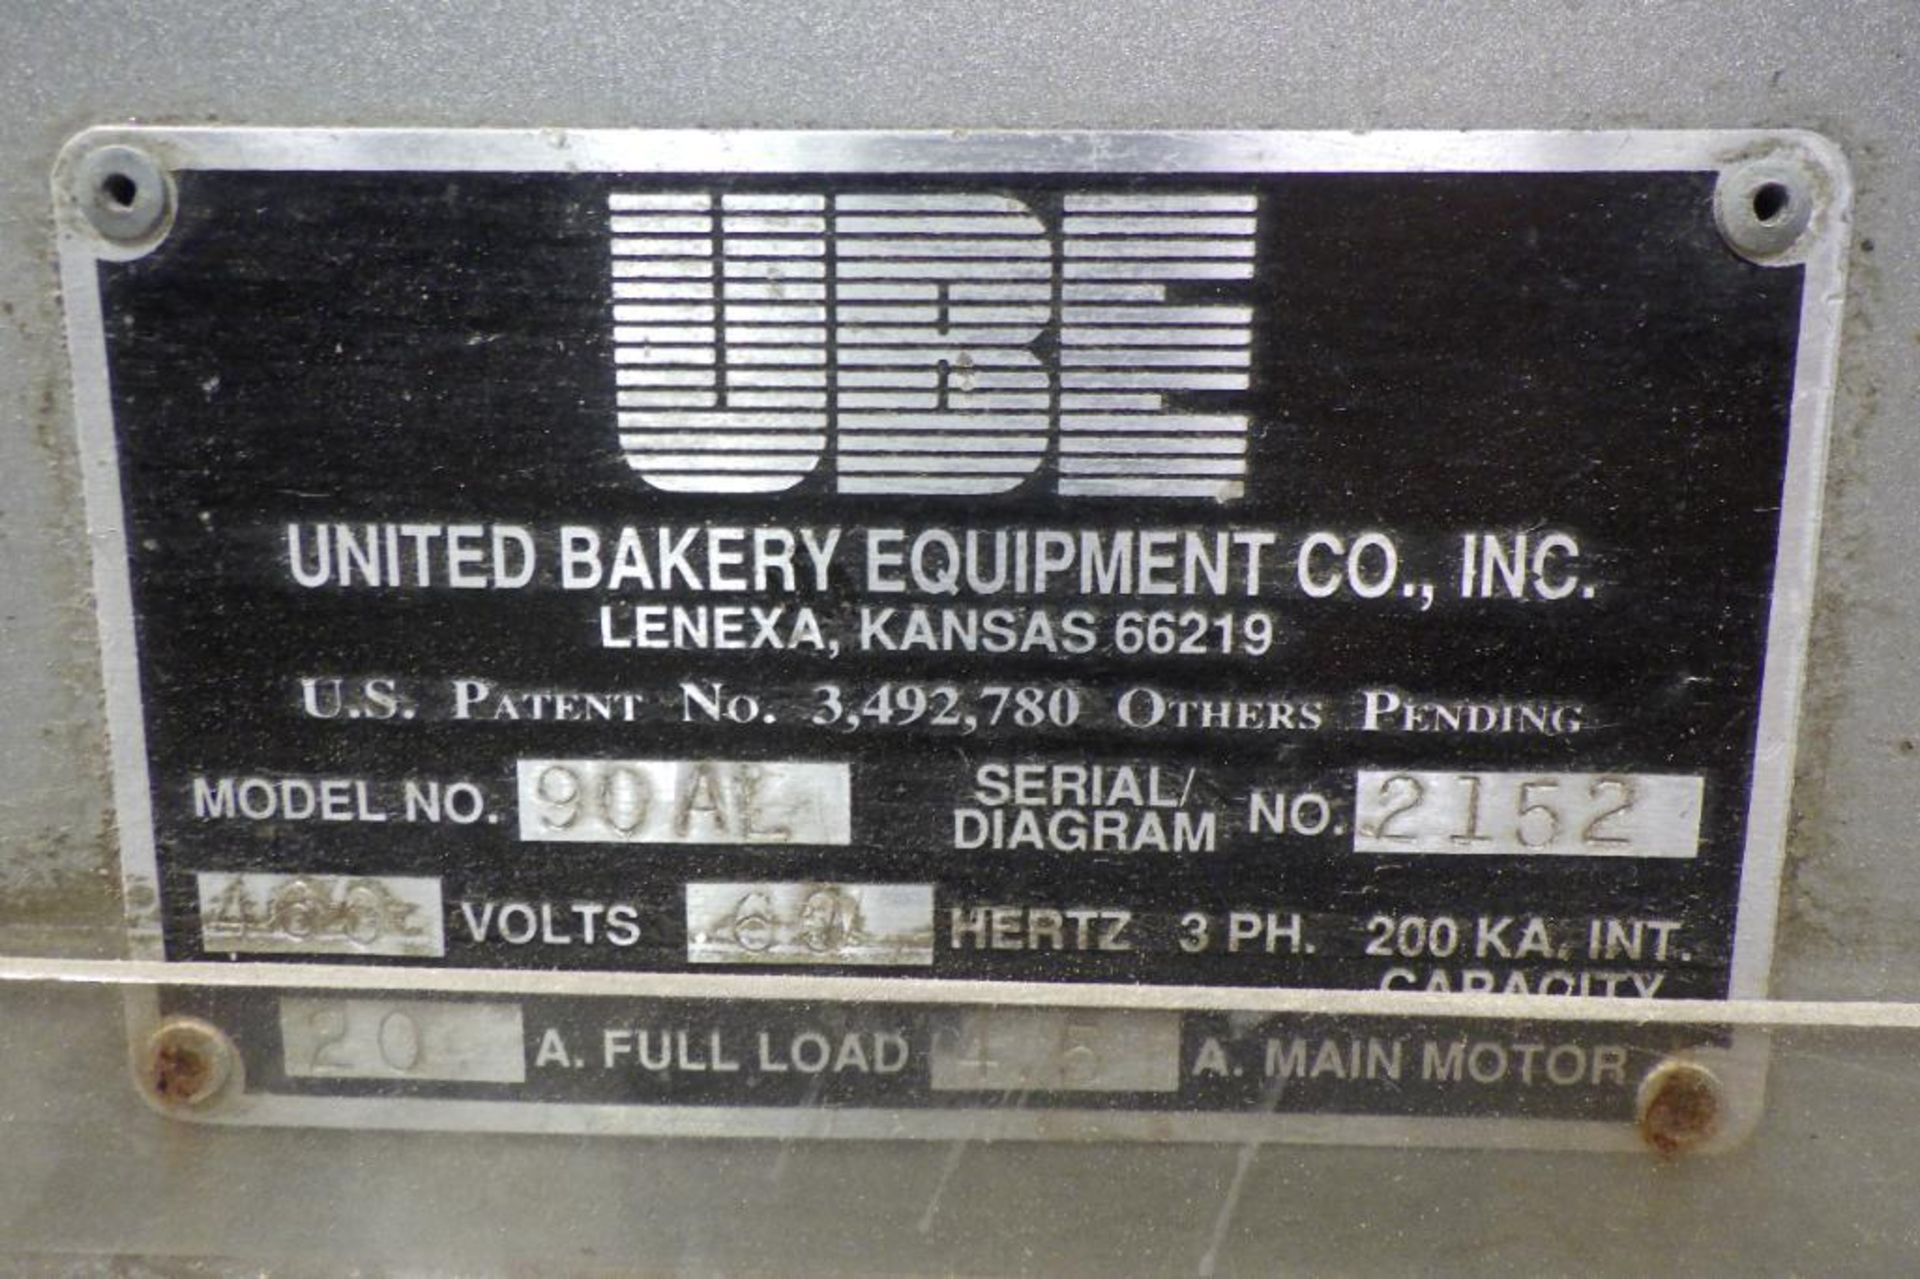 UBE slicing and bagging line - Image 63 of 63